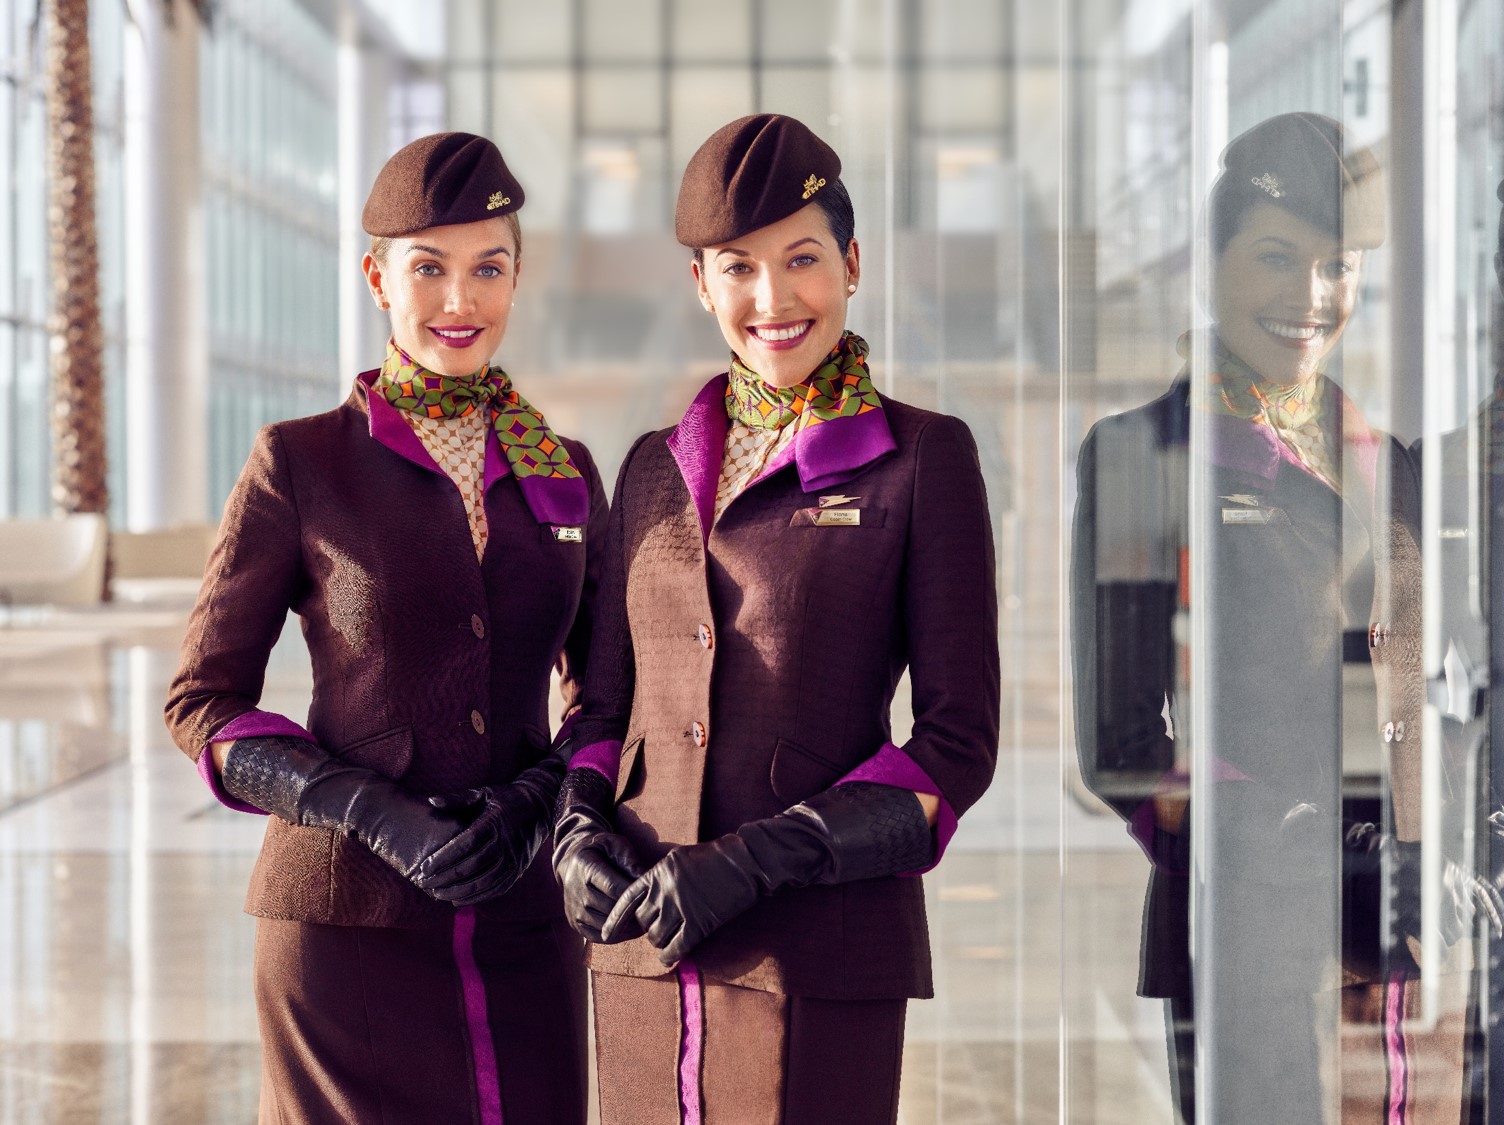 Etihad Holding Cabin Crew Recruitment Events in London, Manchester and Dublin in January 2019